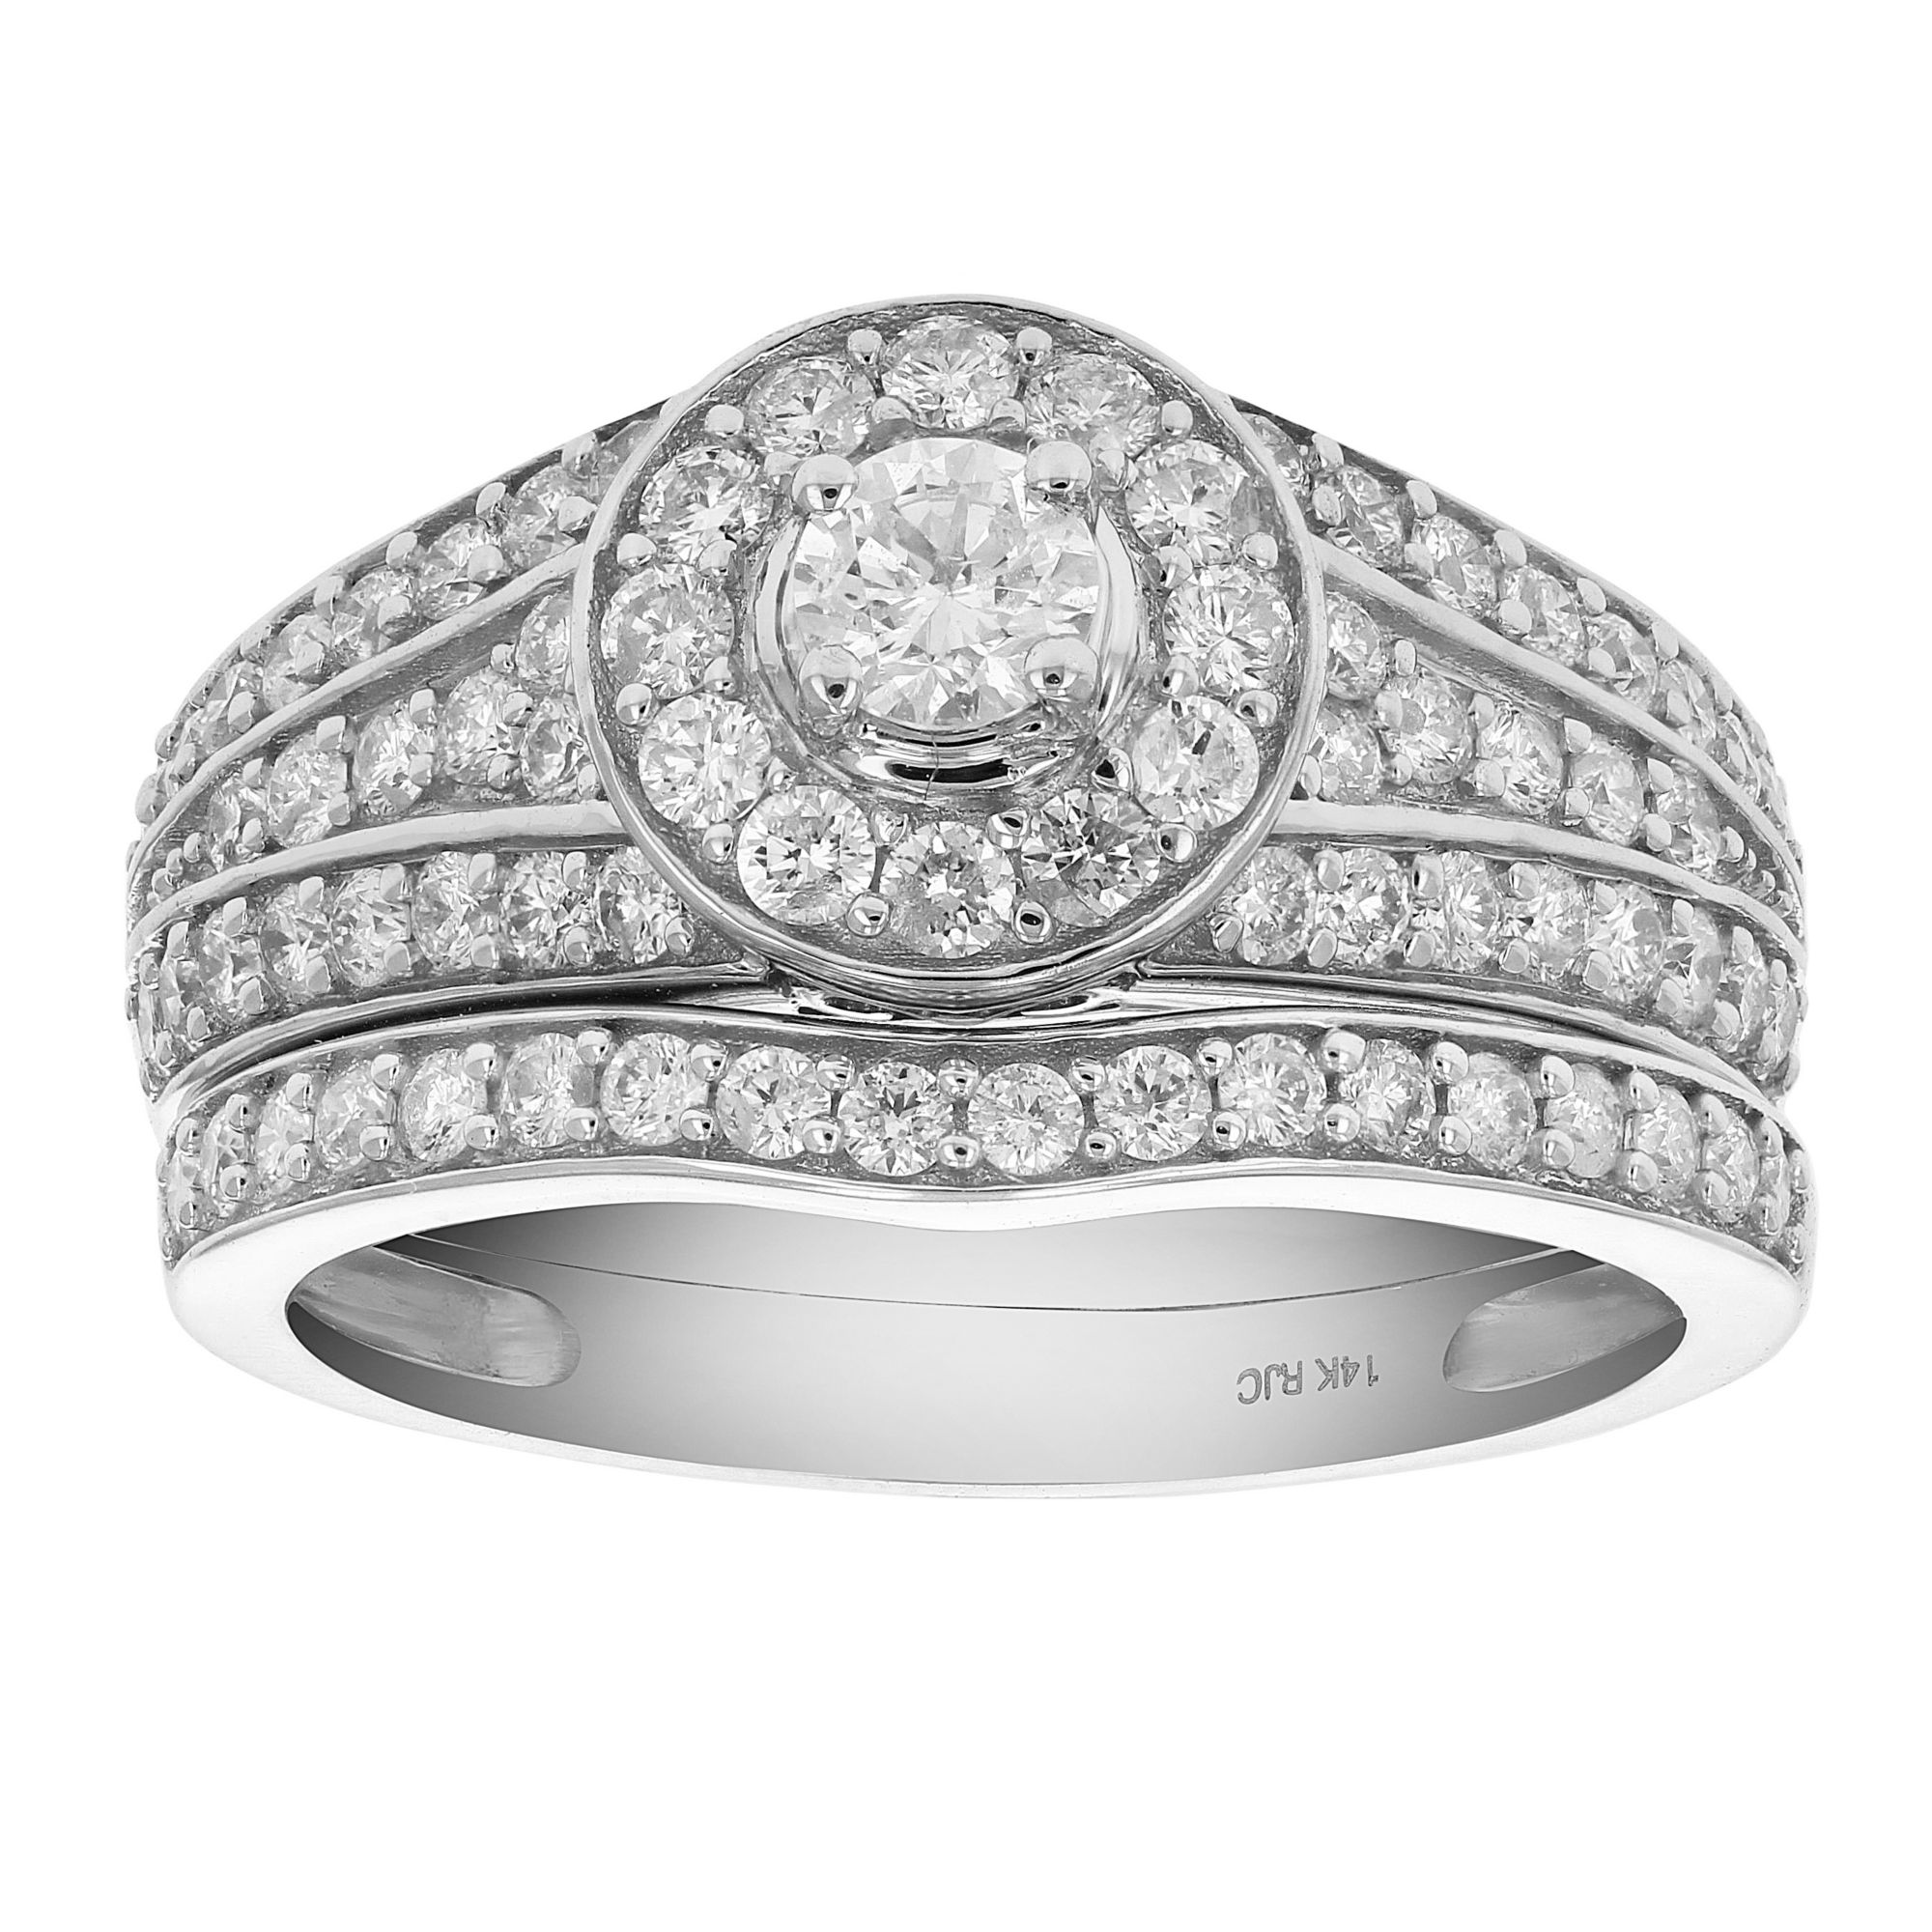 Amairah 1.00 ct. t.w. Diamond Channel Prong Engagement Ring Set in 14k White Gold, Size 5.5